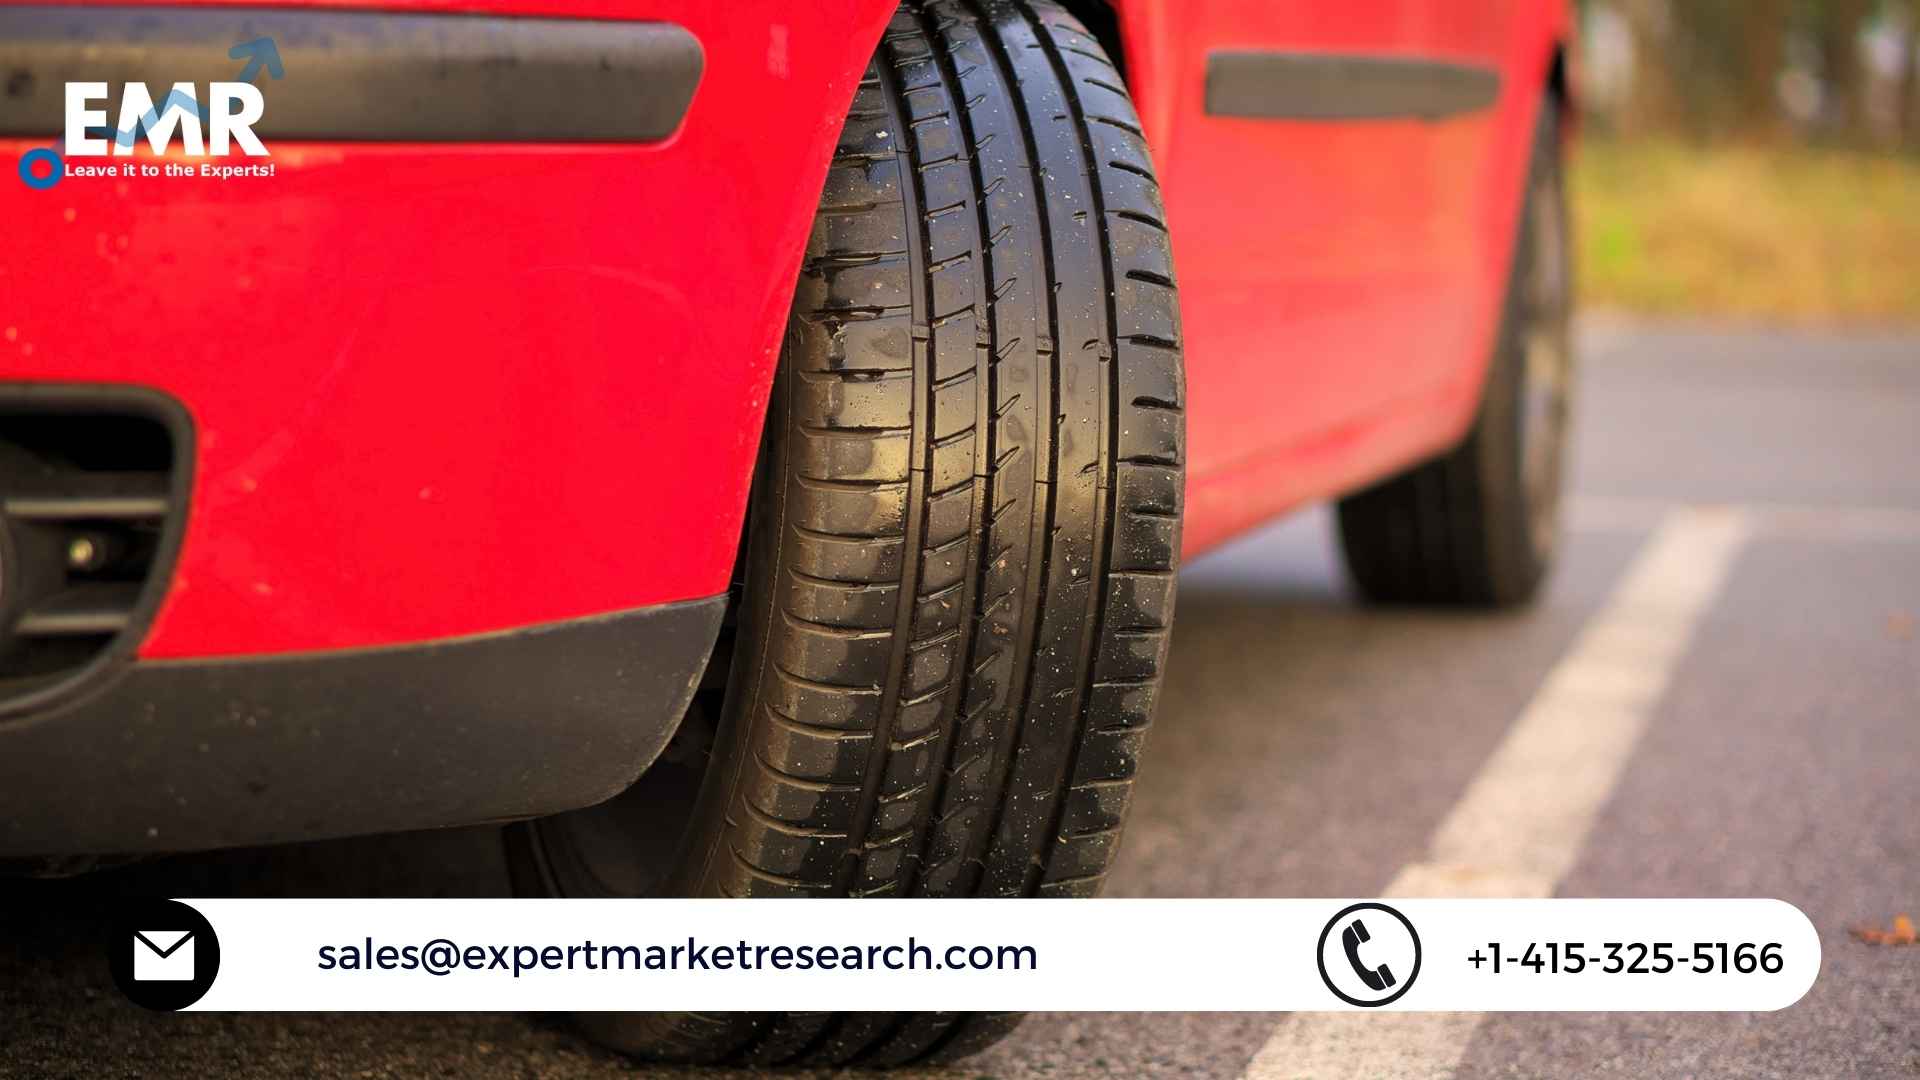 Airless Tyres Market Trends